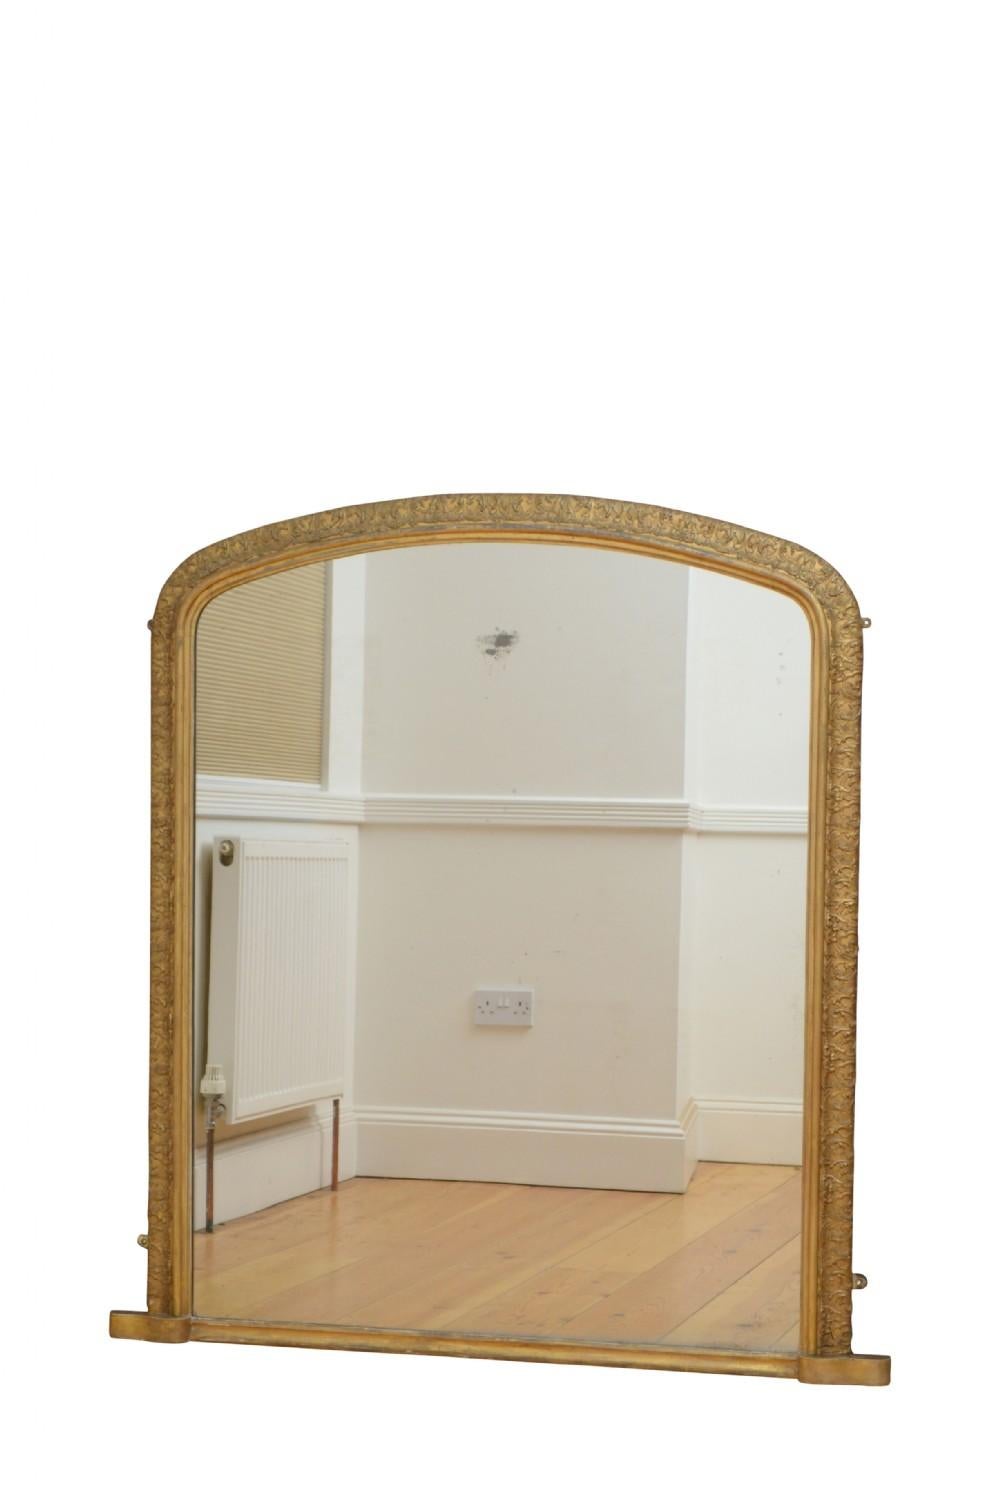 K0330 Exceptional Victorian gilded overmantel mirror, having original glass with some foxing in scroll and foliage decorated gilded frame. This antique mirror retains its original glass, original gilt and original backboards, all in wonderful home